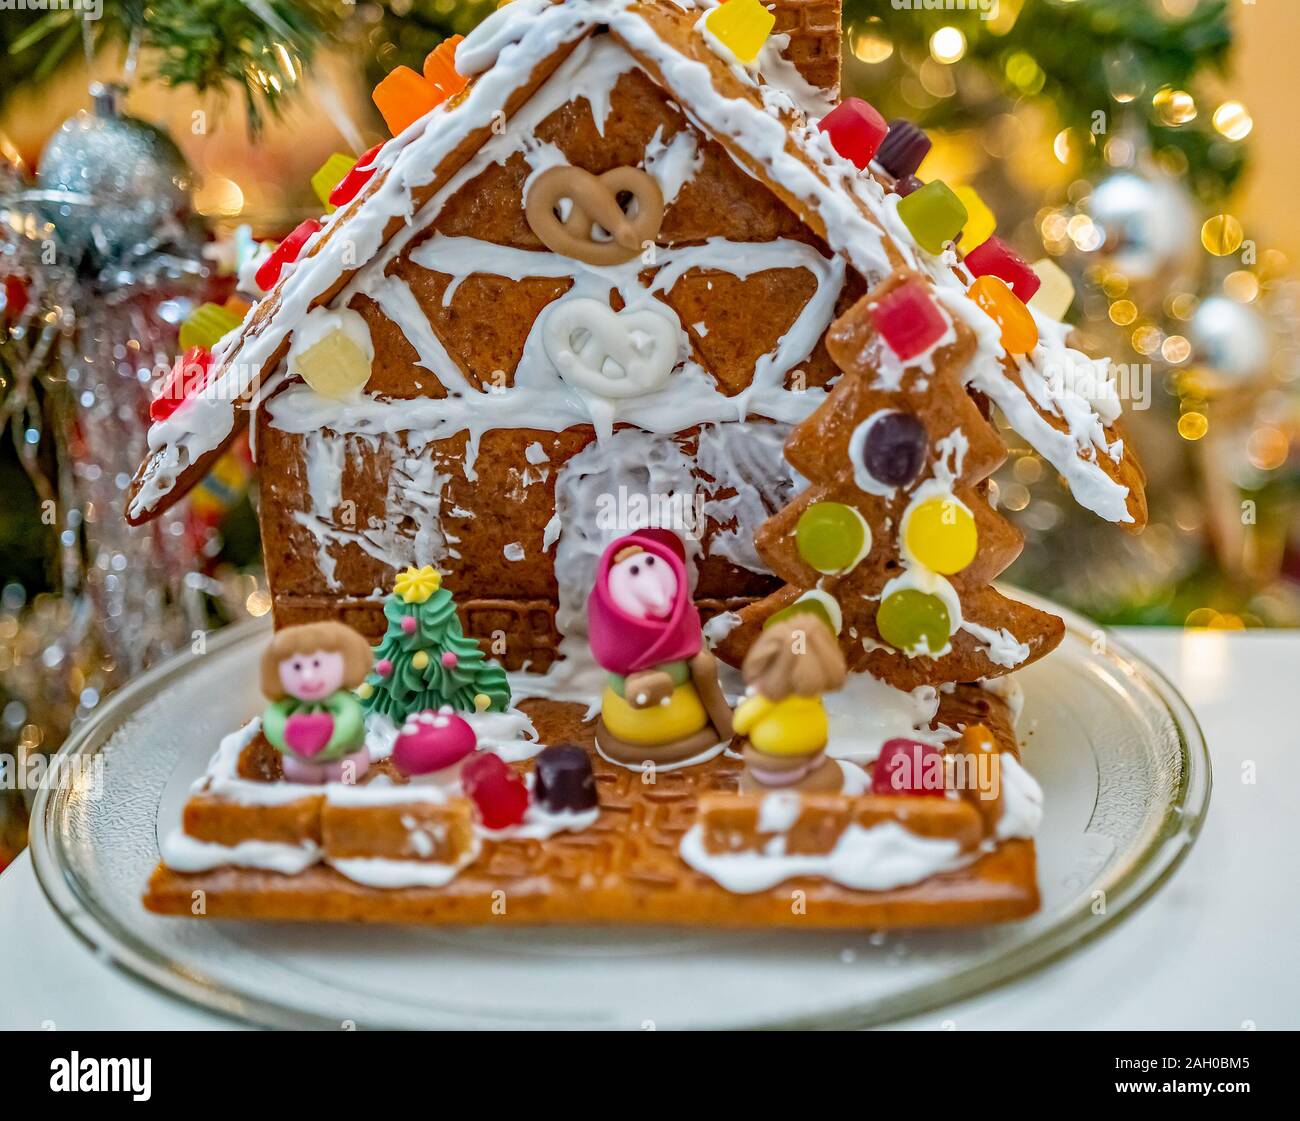 Selective focus on homemade and home decorated ginger bread house with soft focus sugar candy characters out front on a white table Stock Photo